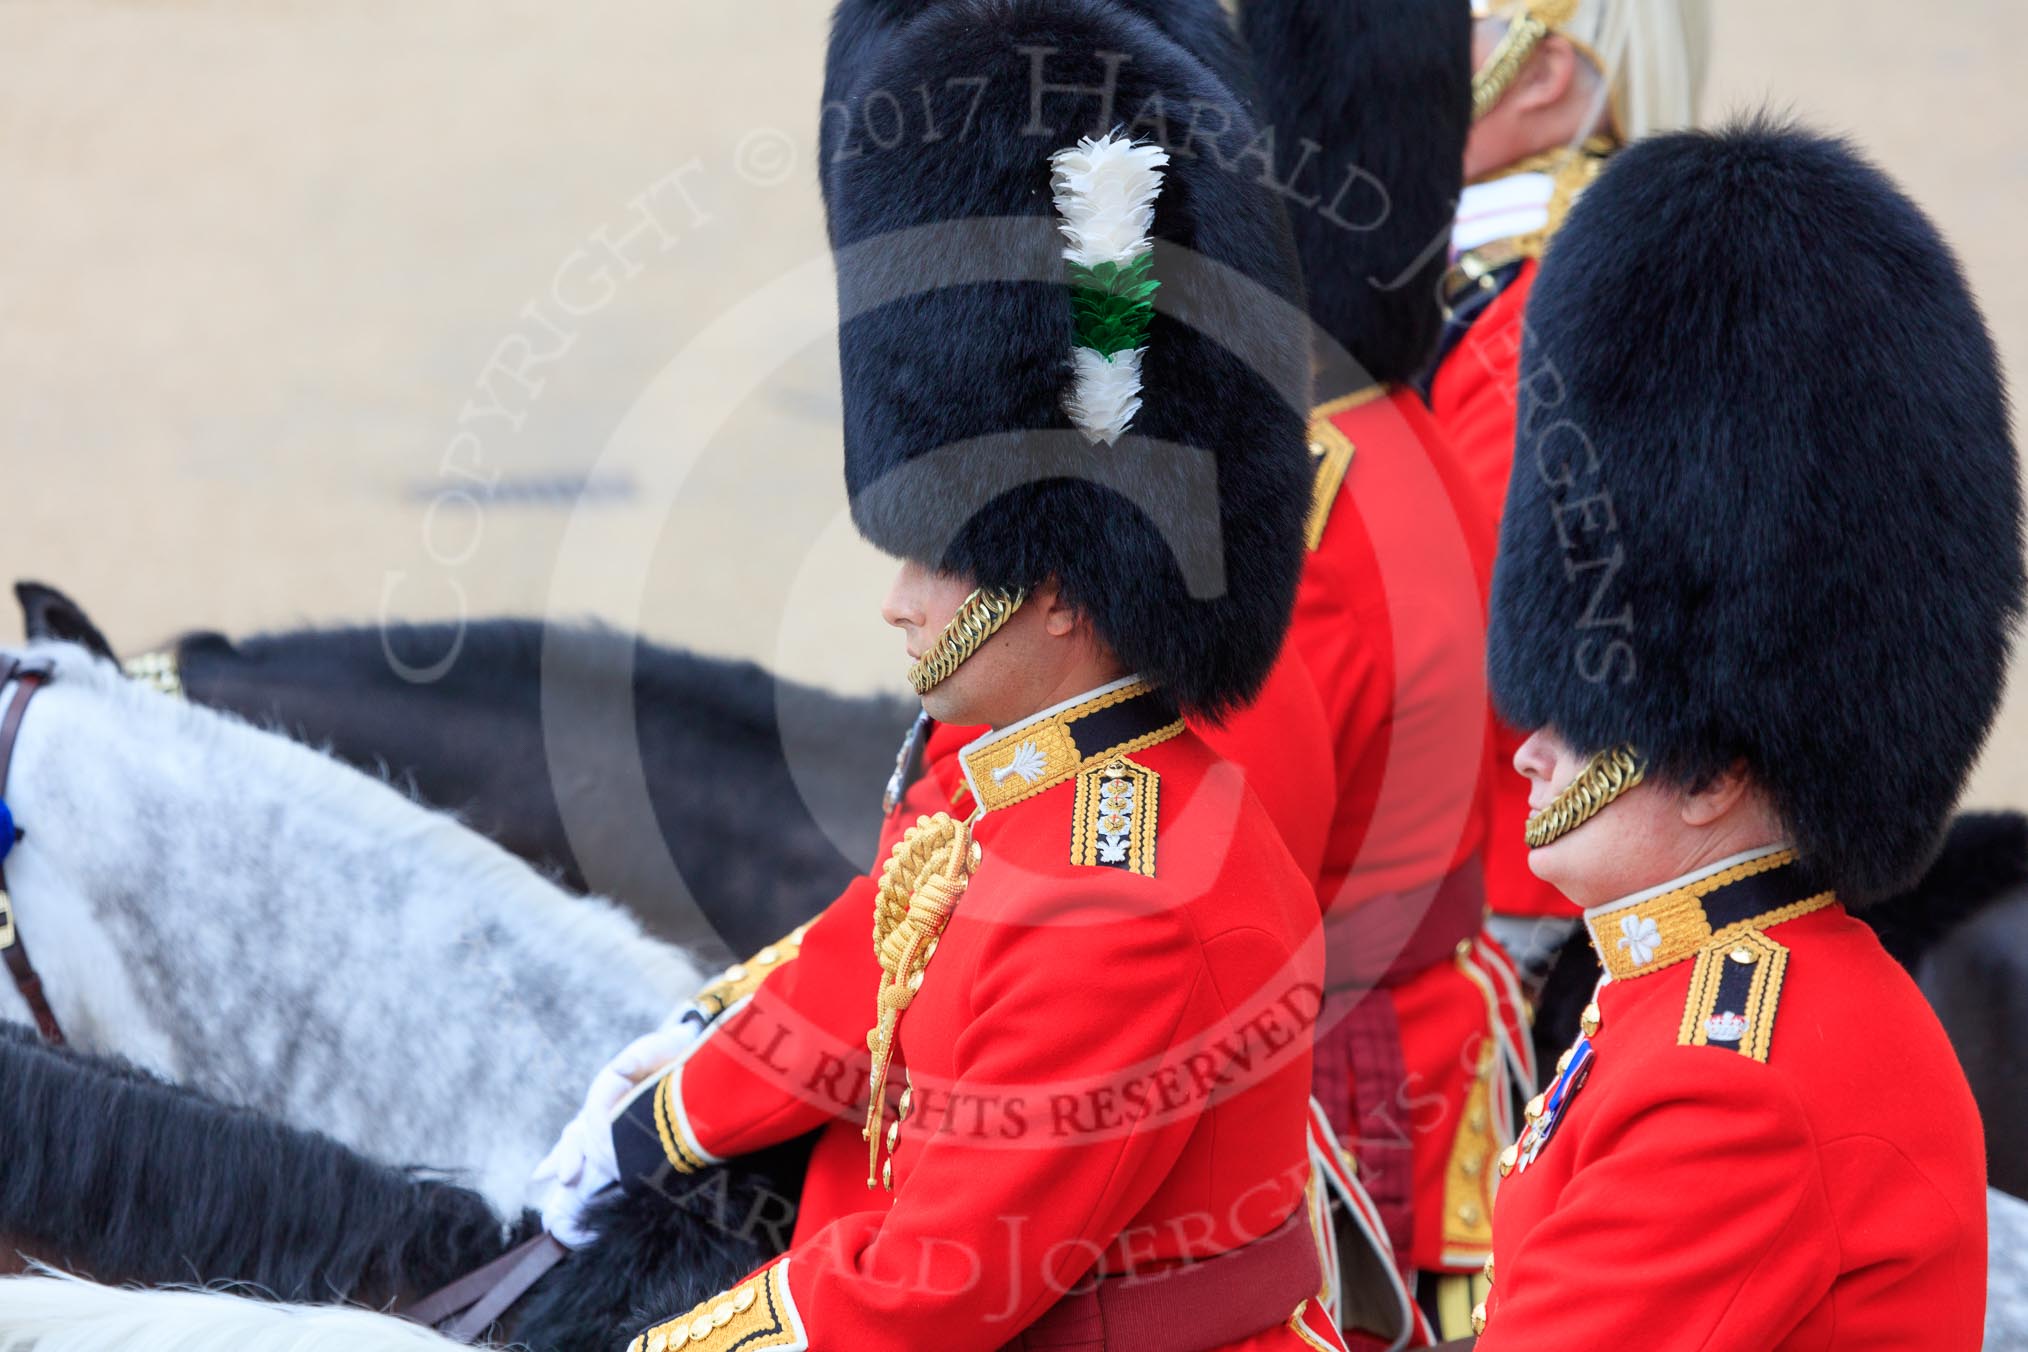 during The Colonel's Review {iptcyear4} (final rehearsal for Trooping the Colour, The Queen's Birthday Parade)  at Horse Guards Parade, Westminster, London, 2 June 2018, 11:04.